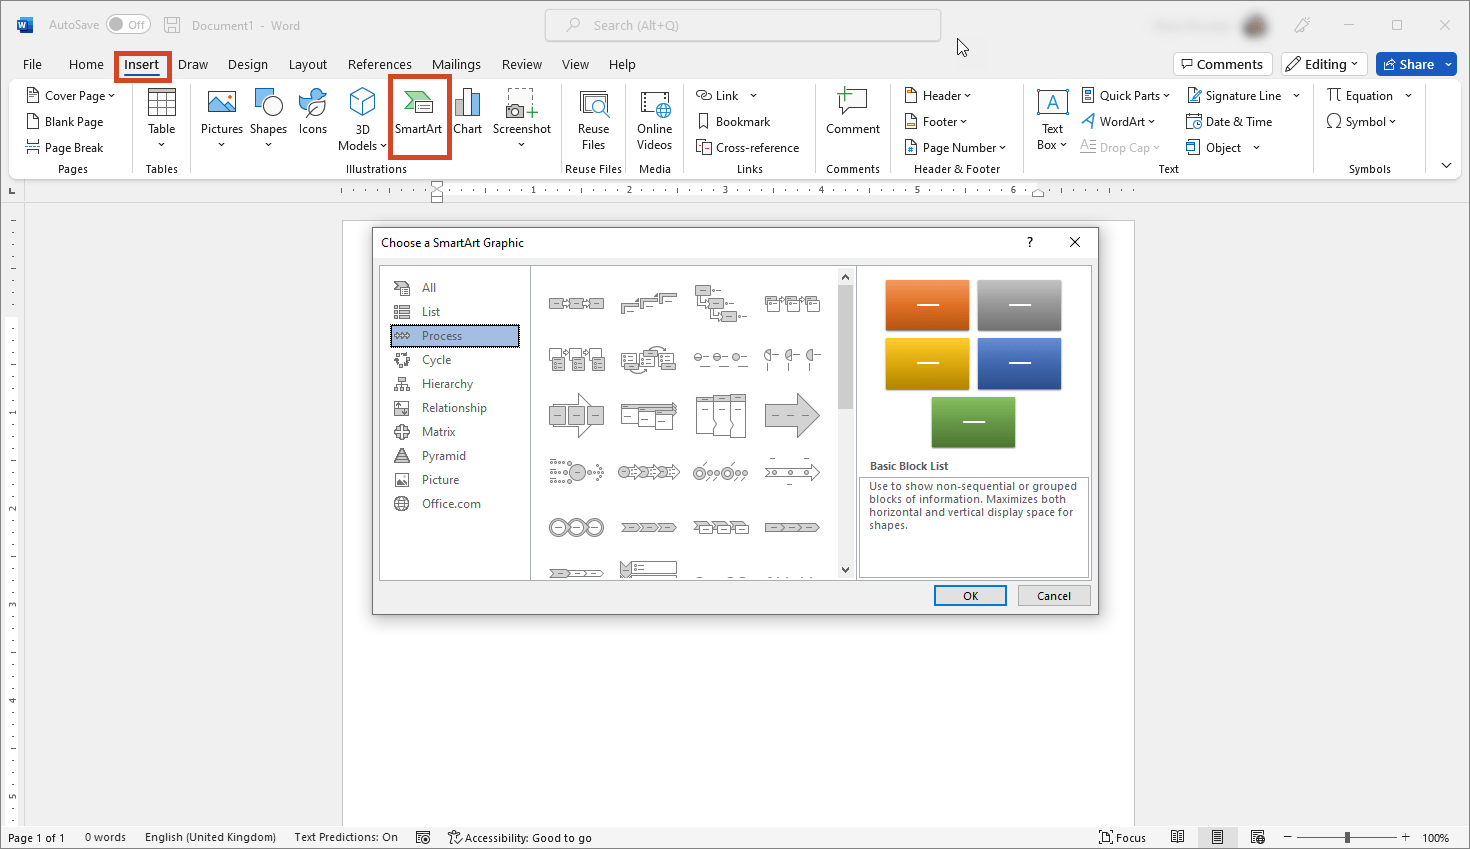 Graphical tools for creating project visuals in Microsoft Word